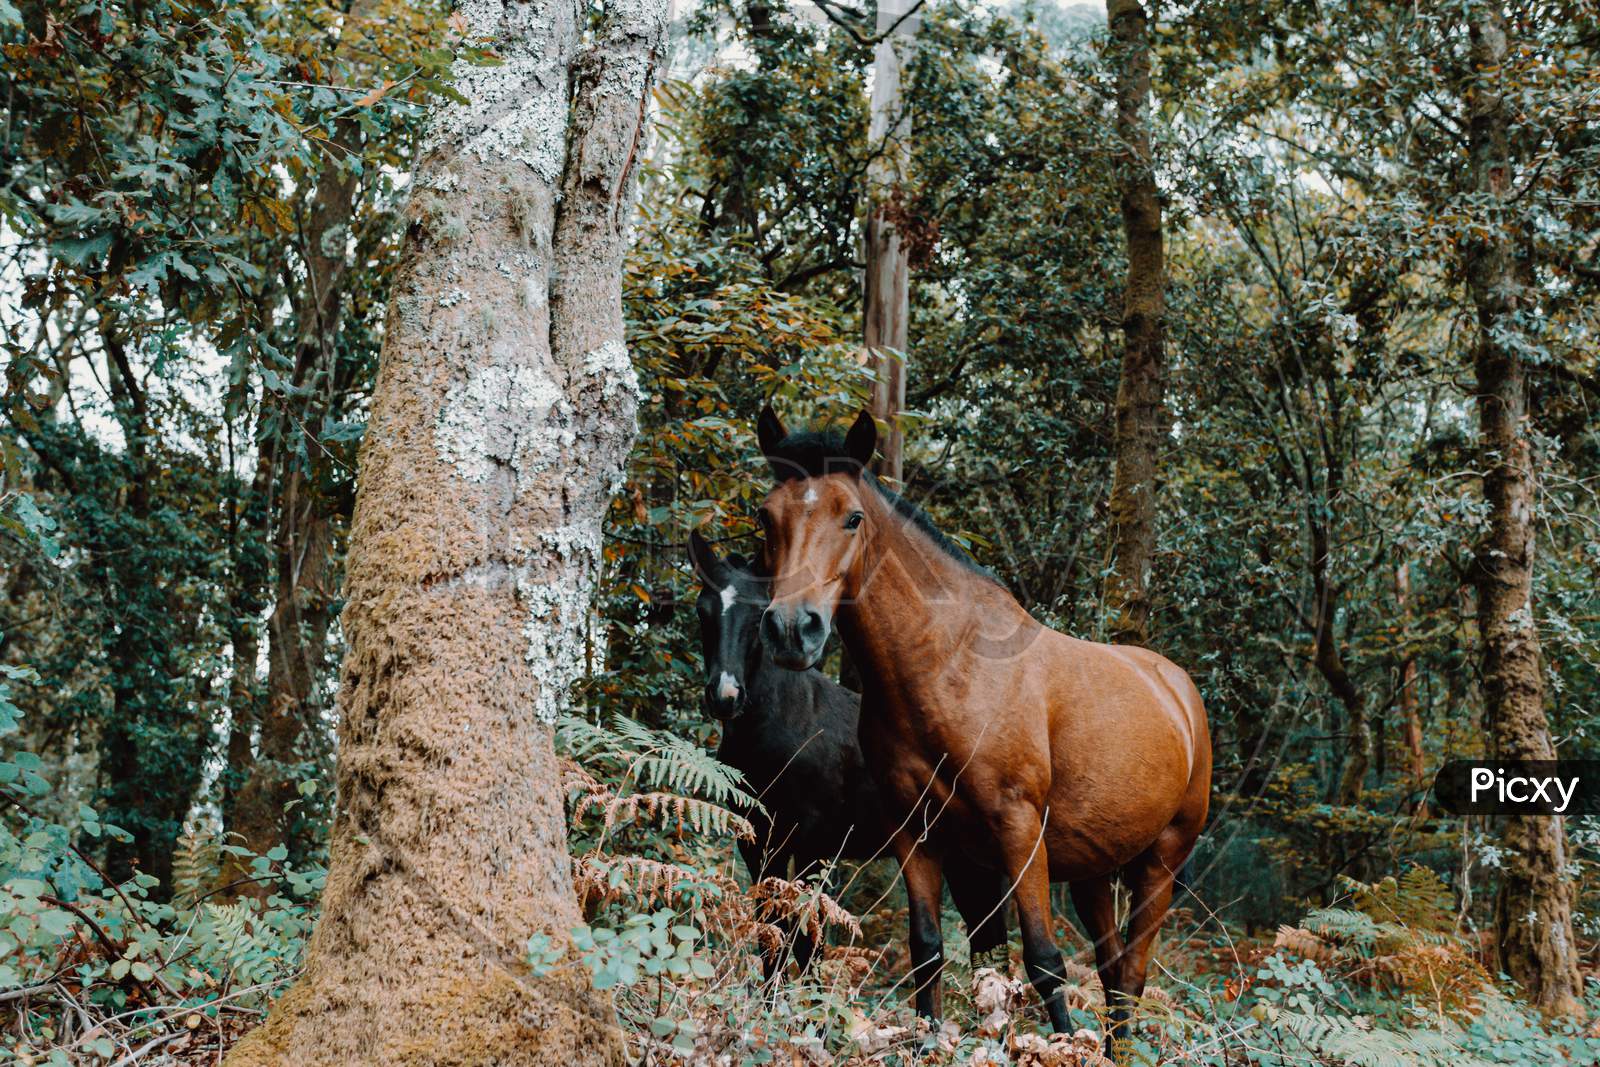 Curious Horses In The Middle Of The Forest Looking Straight To Camera During A Bright Day